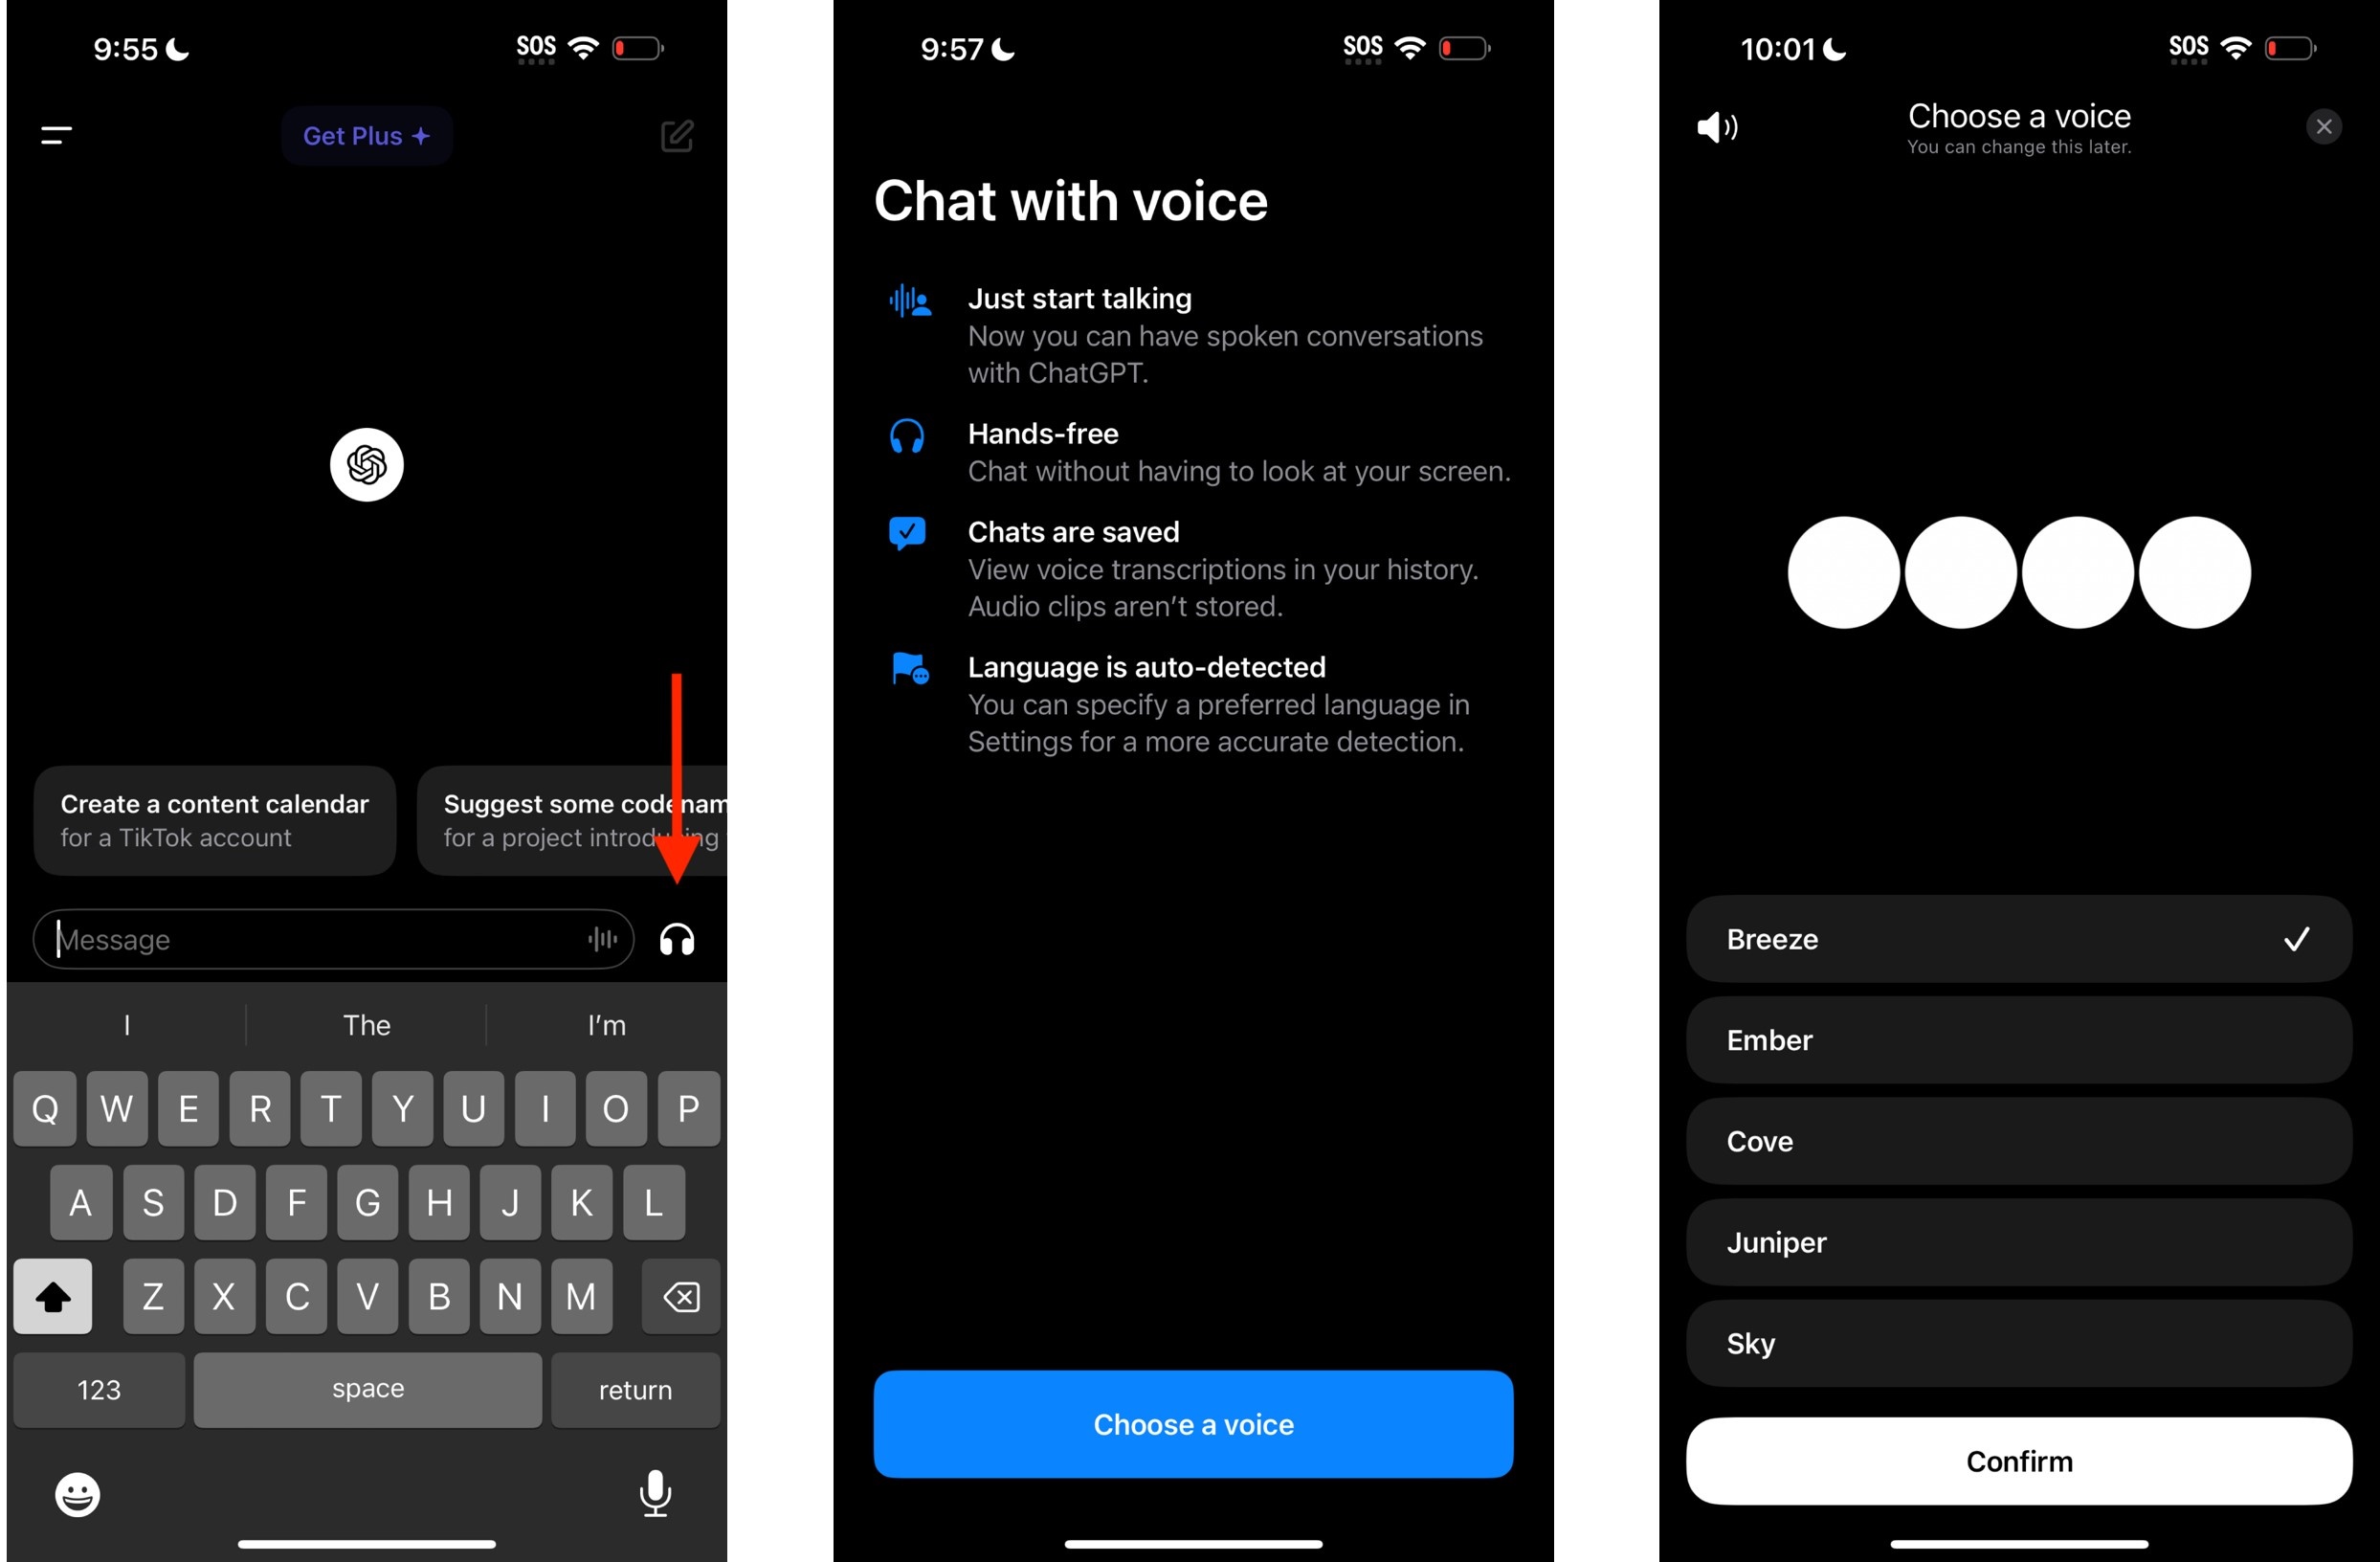 Now you can chat with ChatGPT using your voice